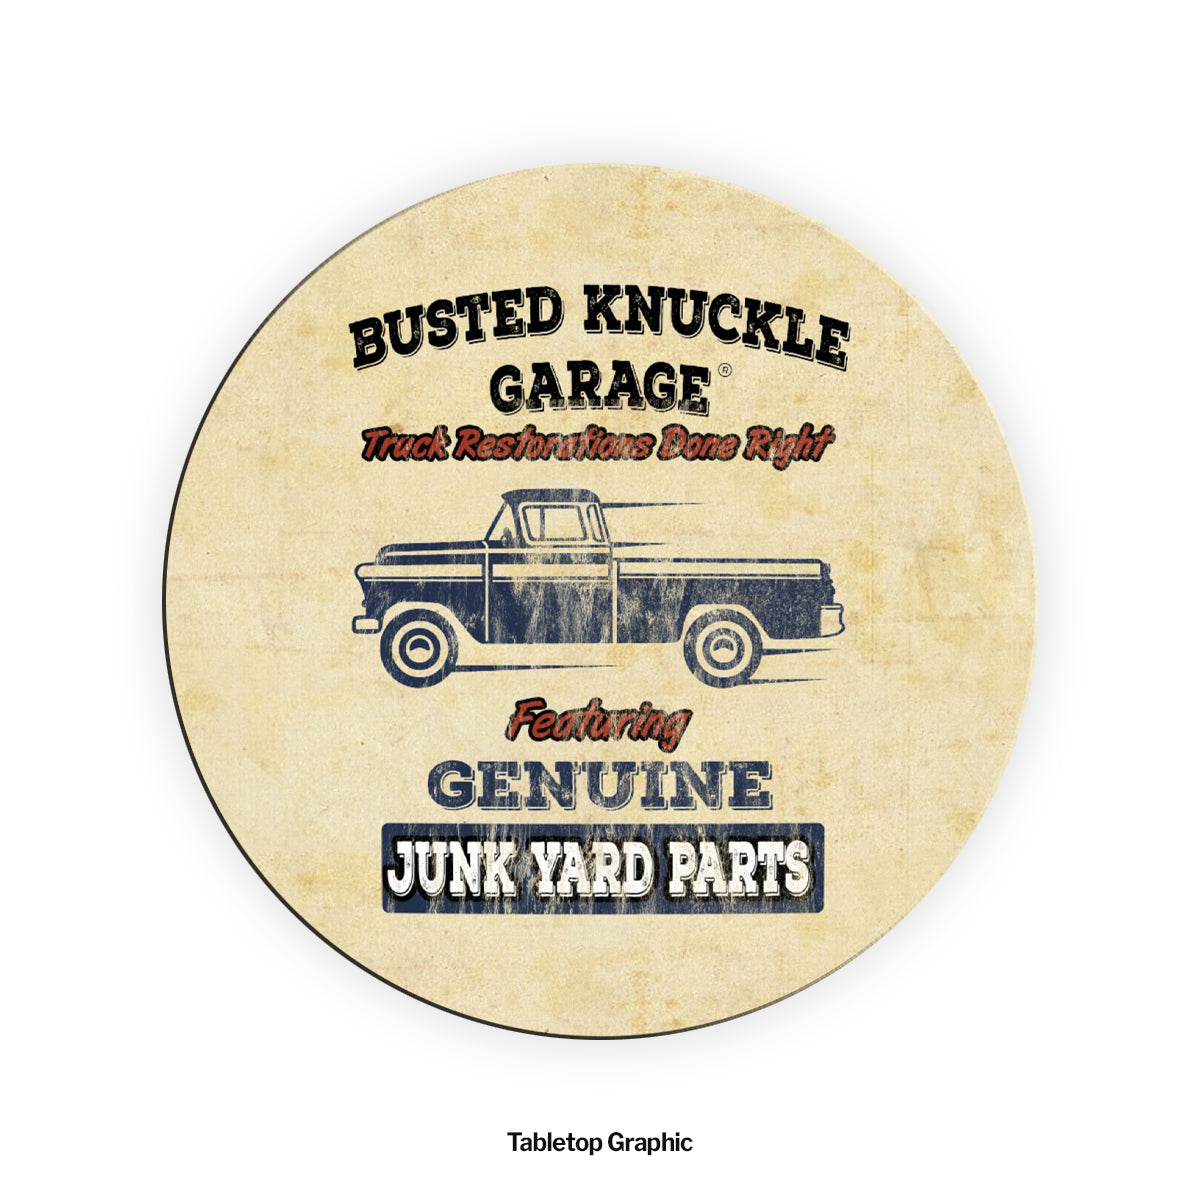 Busted Knuckle Garage Carguy Genuine Junk Yard Parts Pub Table